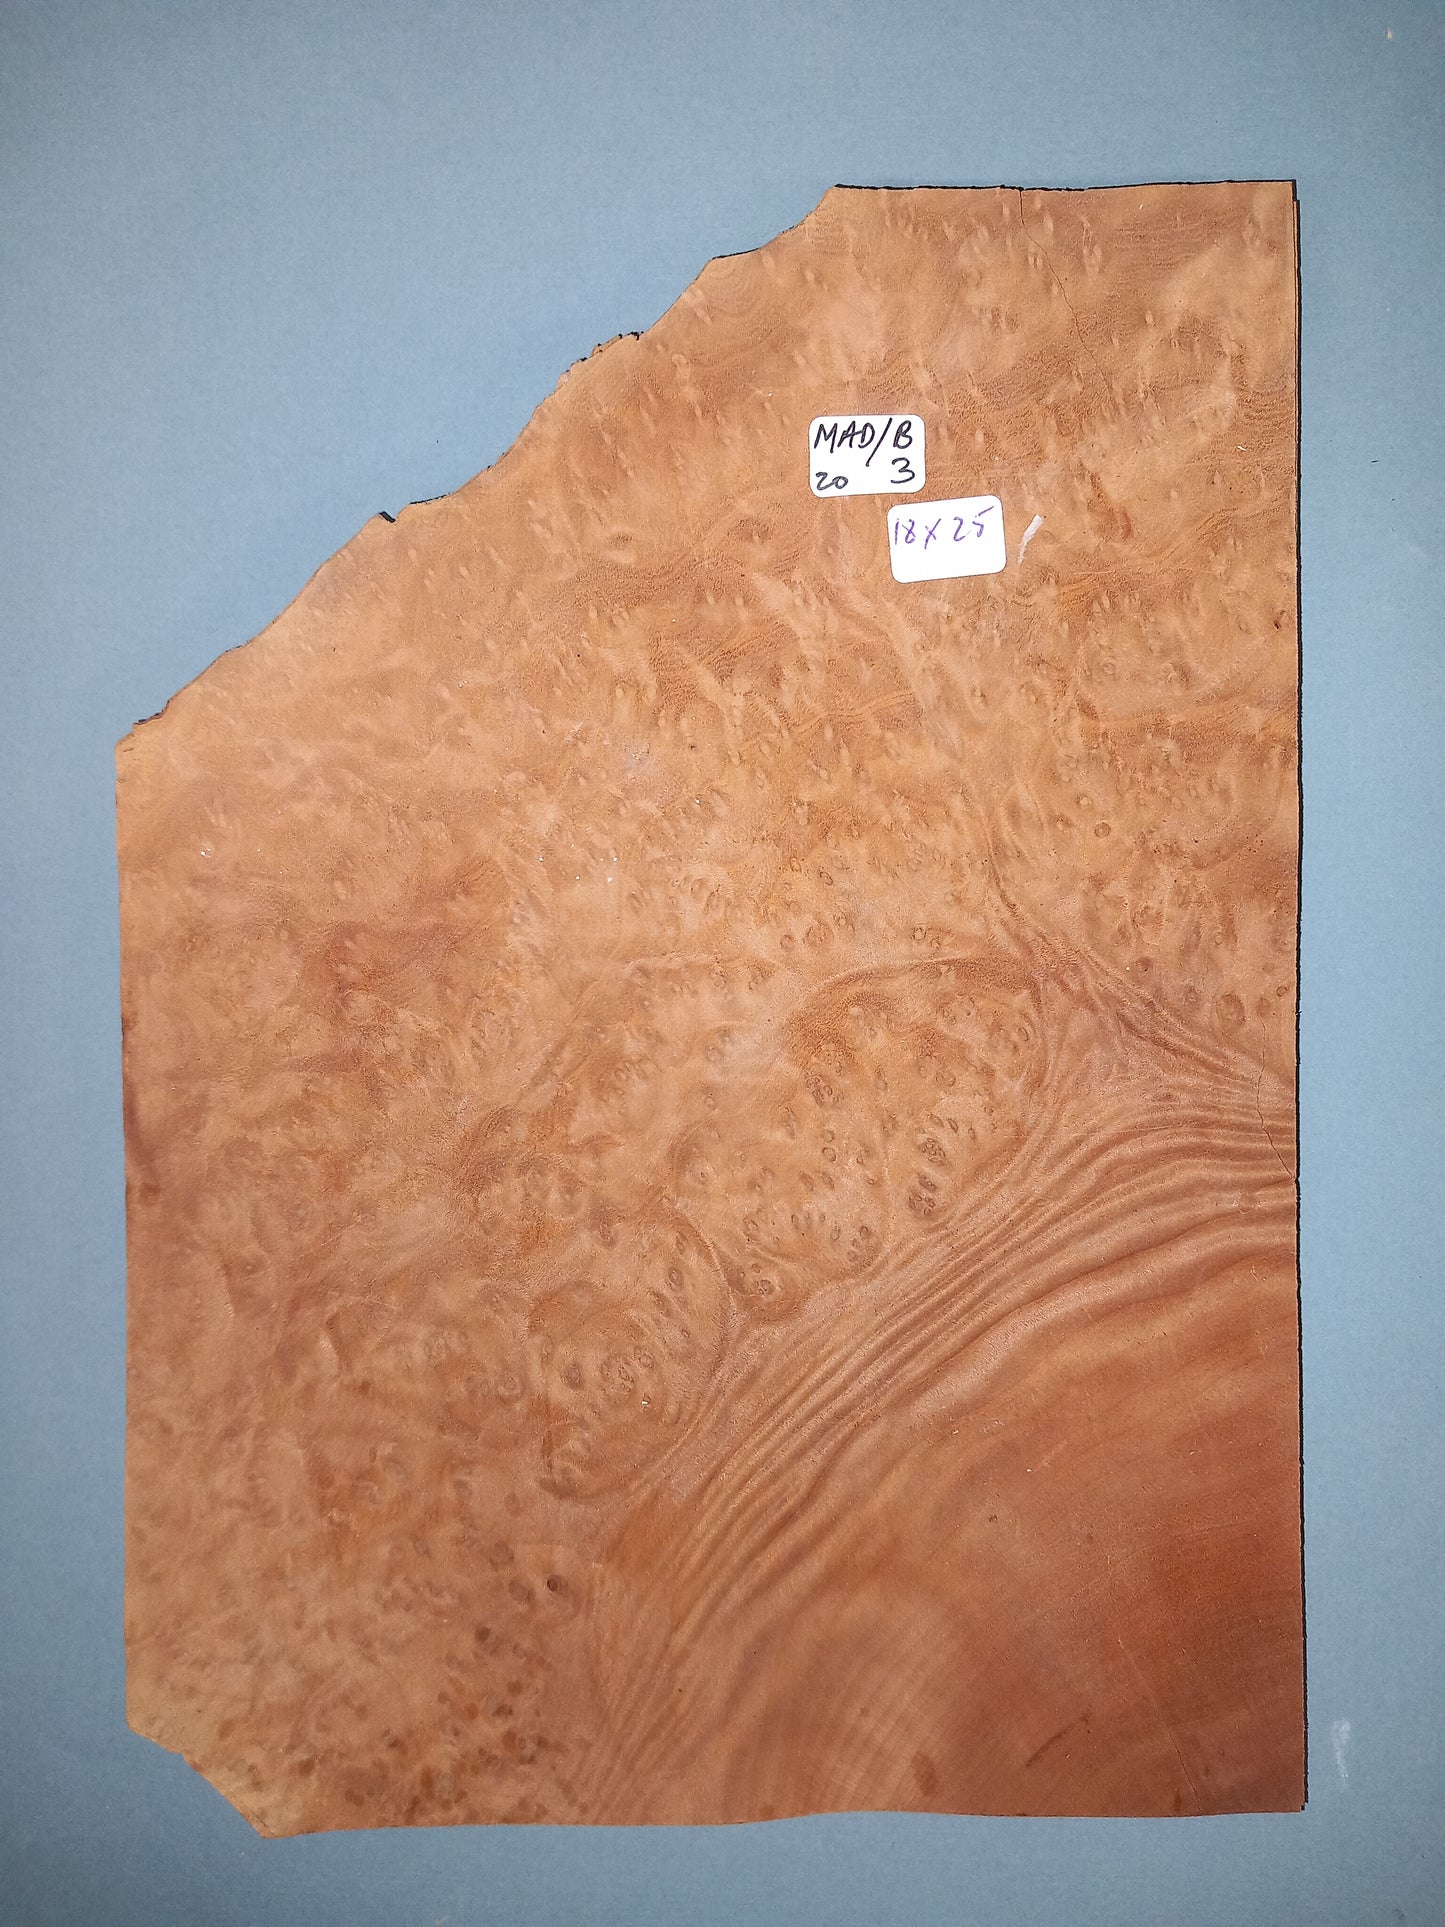 CONSECUTIVE SHEETS OF MADRONE BURR VENEER  18 X 25 CM